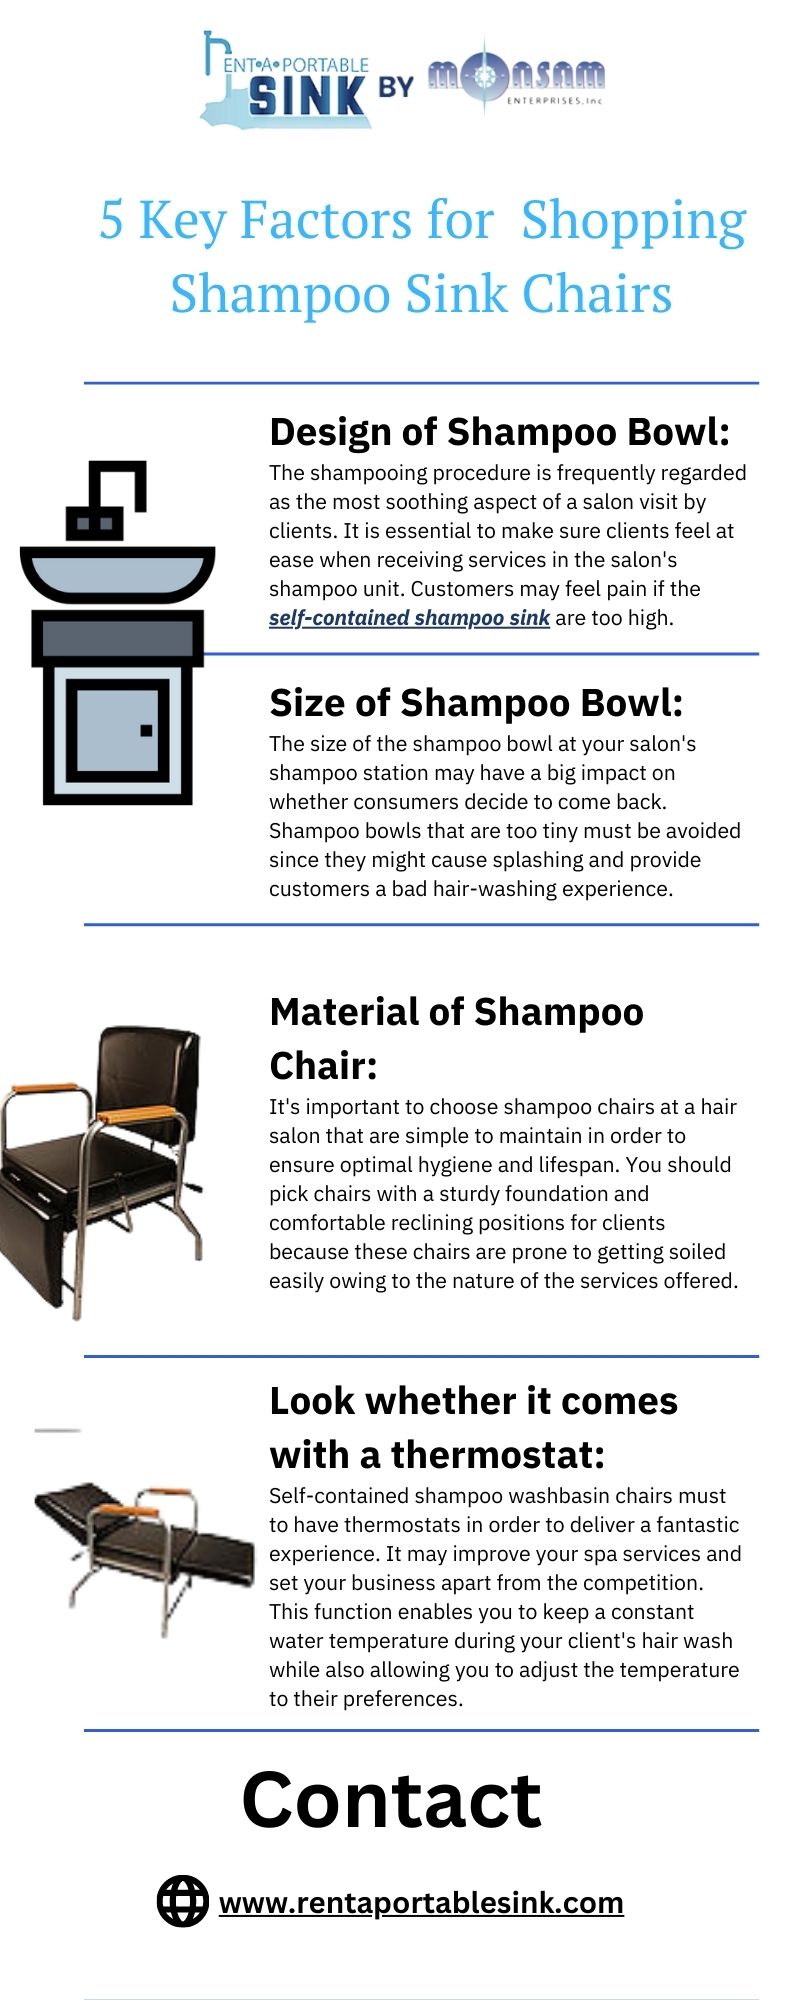 The Importance of Shopping for Quality Shampoo Sink Chairs